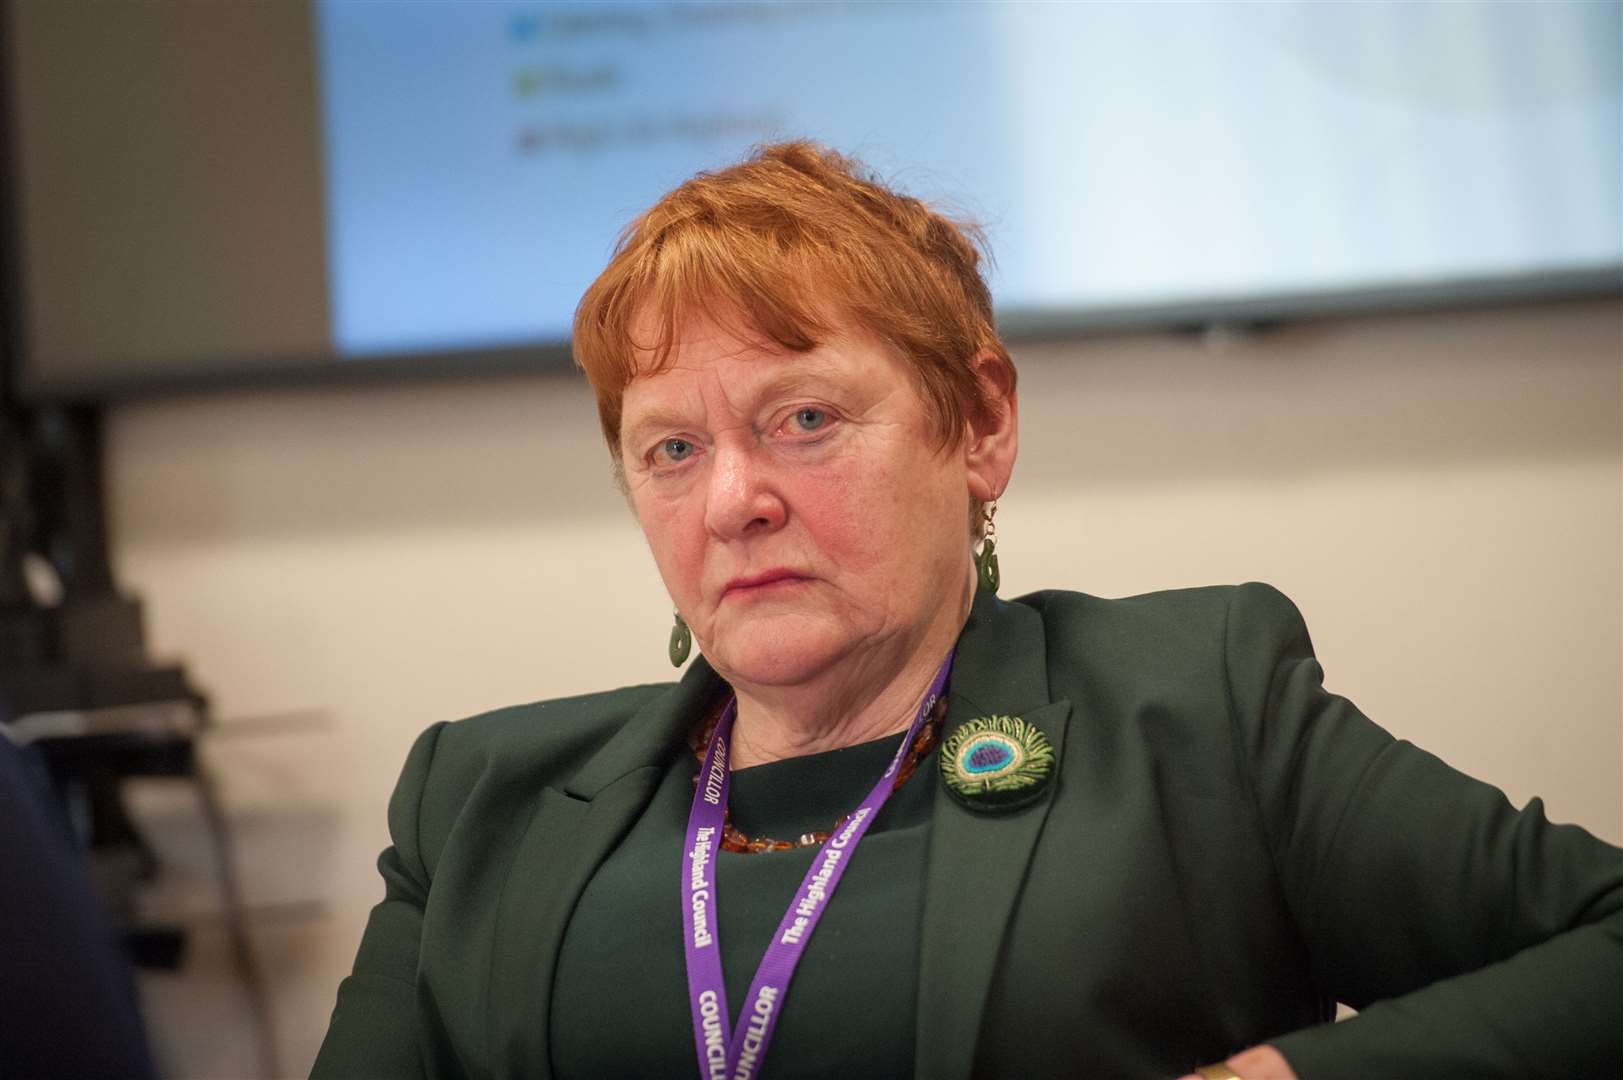 Councillor Margaret Davidson says changes have already been made to governance arrangements.